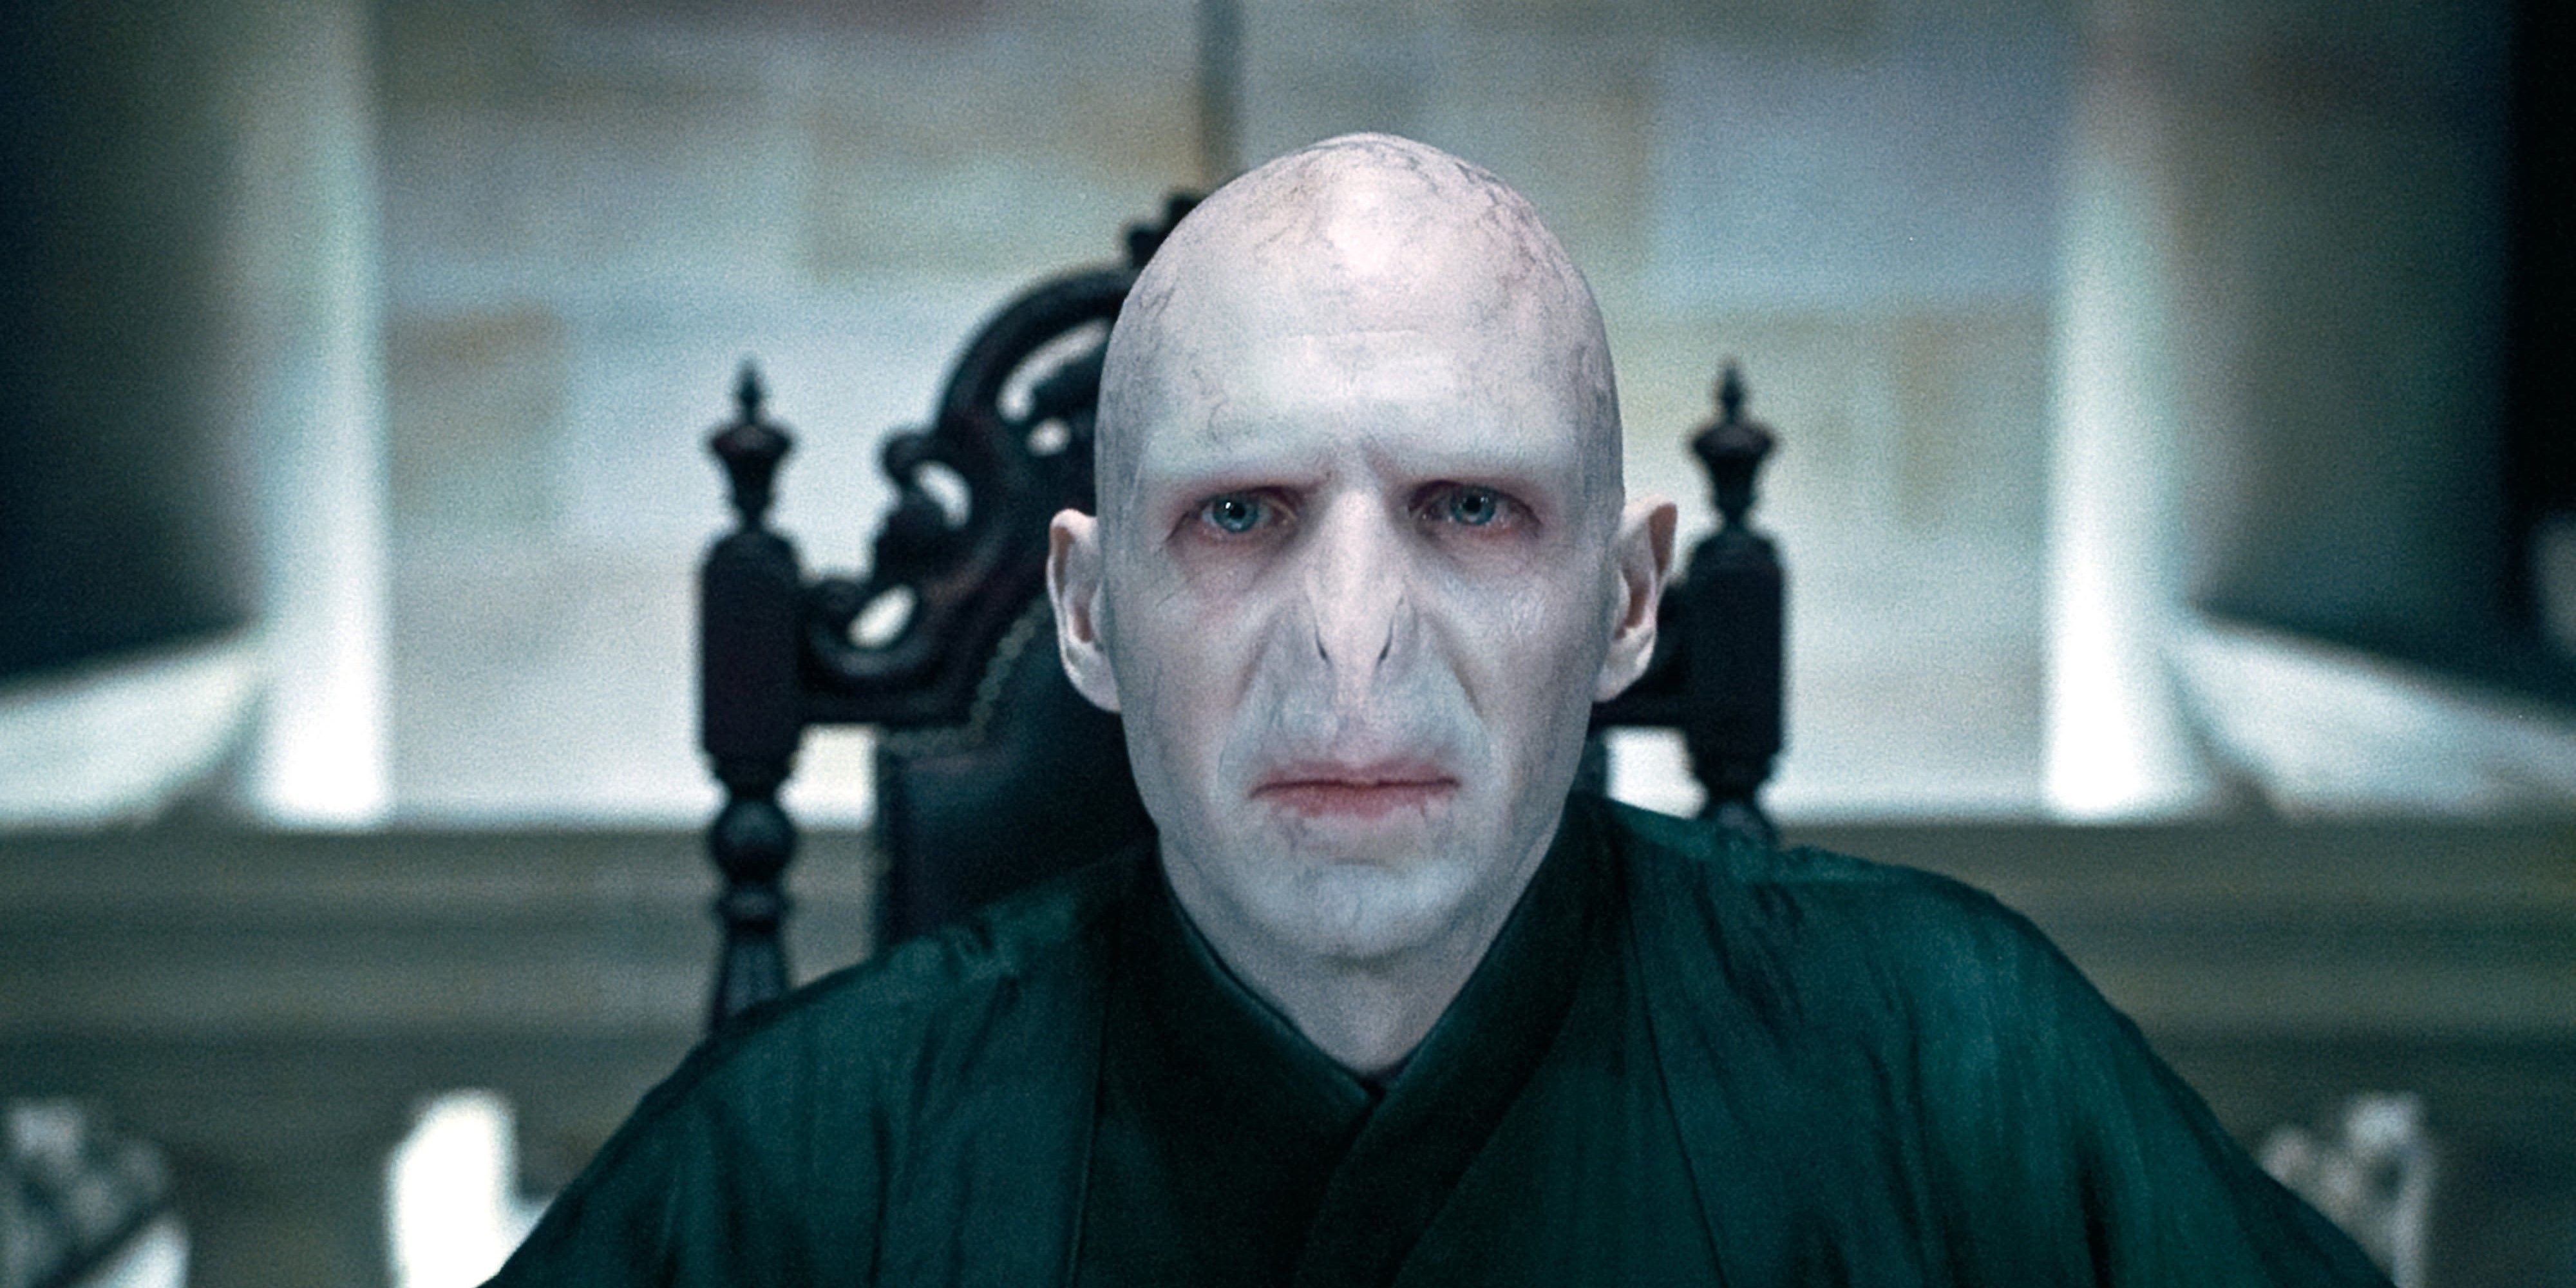 How Voldemort s Soul Is Only Split Into Seven Horcruxes When He s Killed More Than Seven People